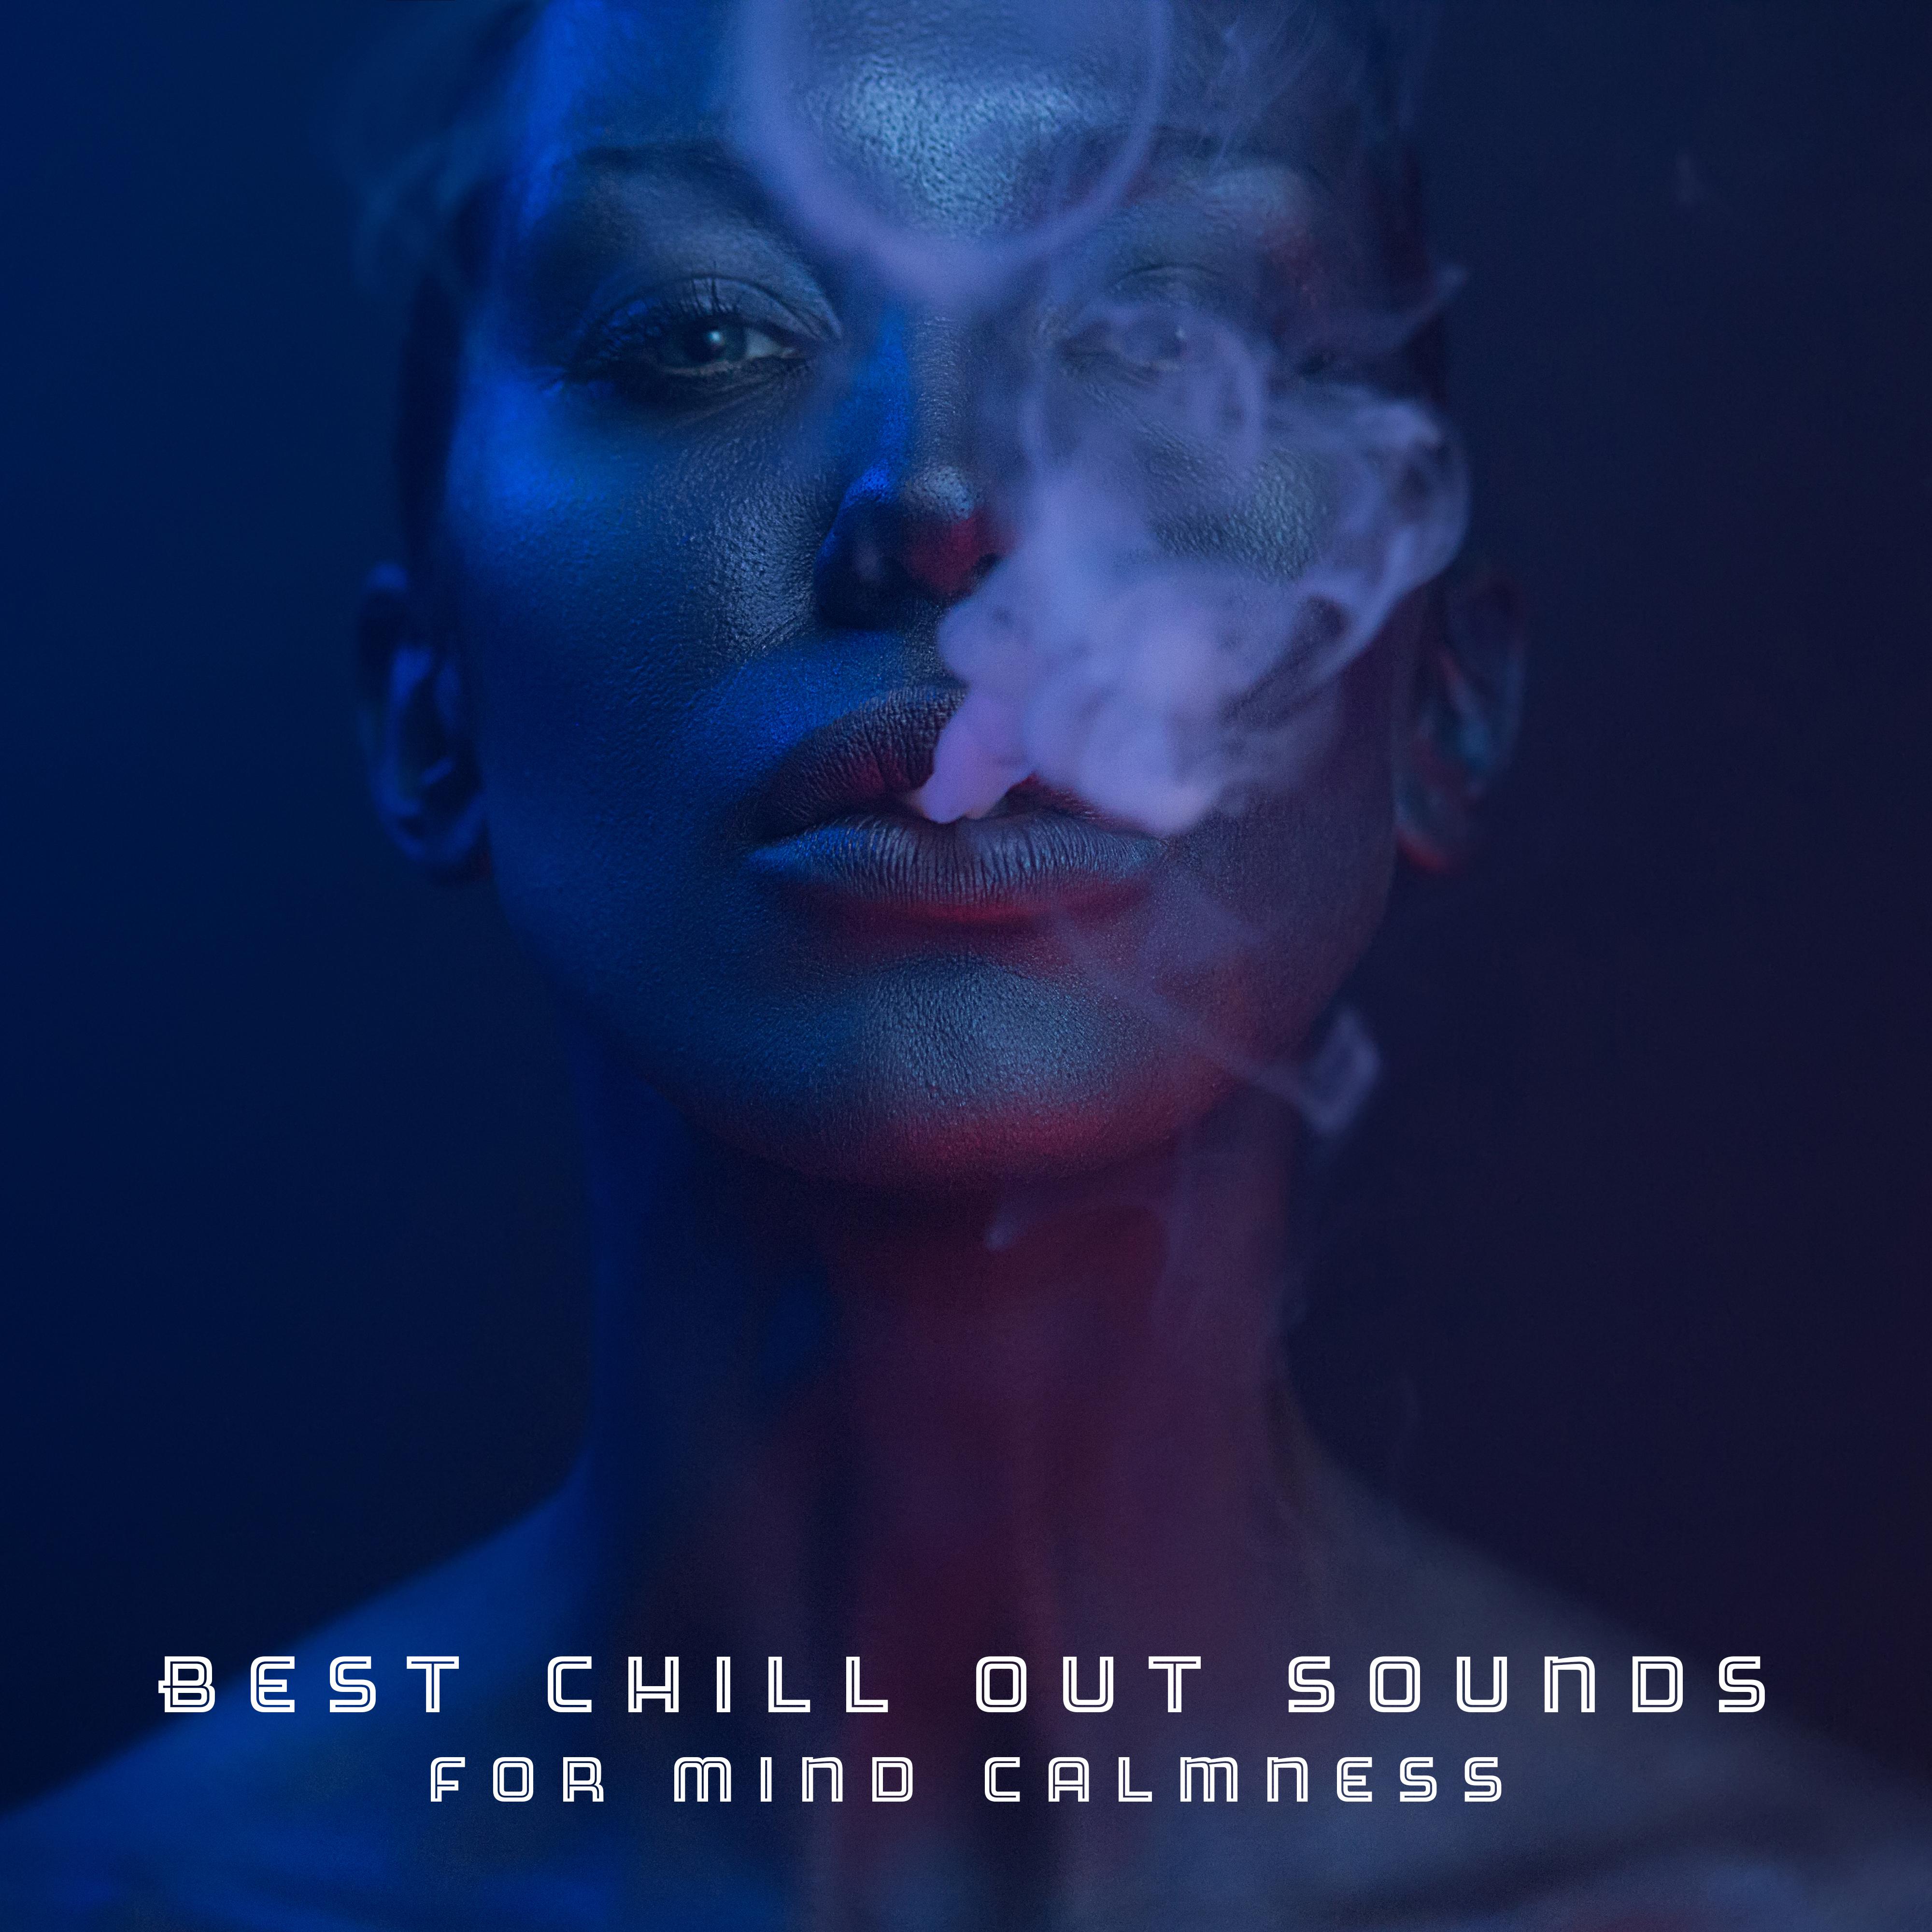 Best Chill Out Sounds for Mind Calmness